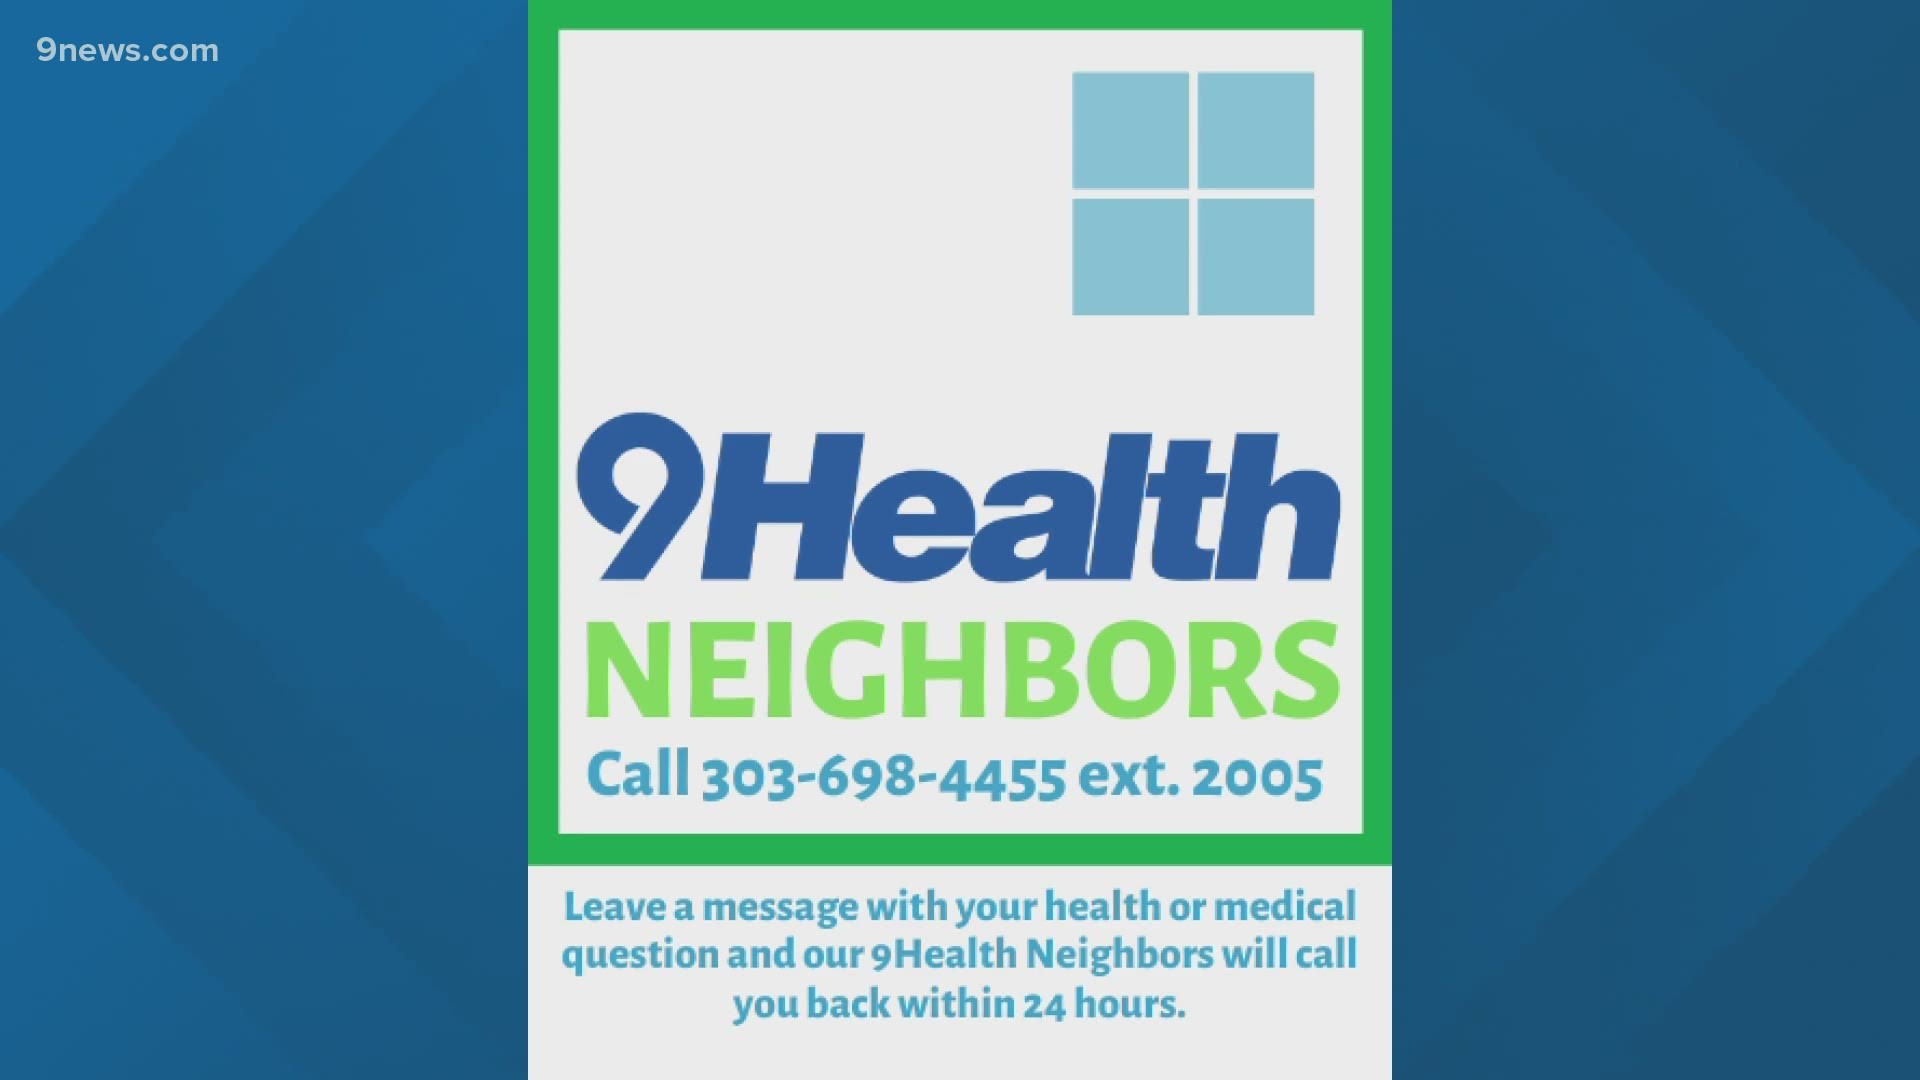 9Health Neighbors offers a friendly voice to those who have health and medical questions